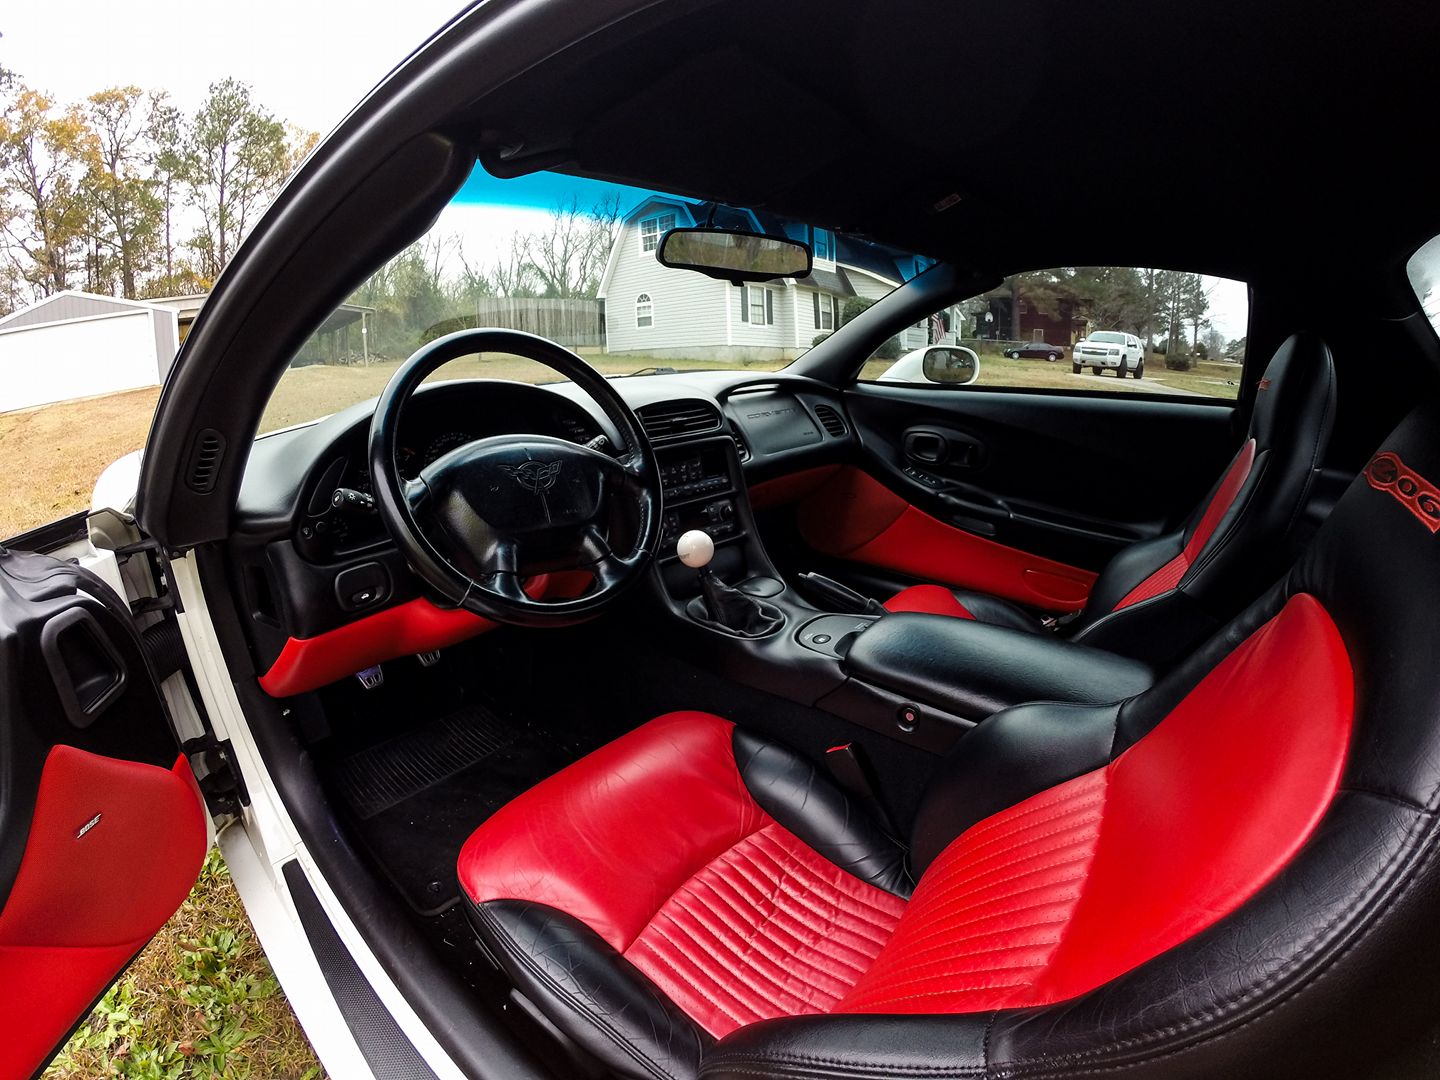 Fs For Sale C5 Z06 Mod Red Interior Swap Parts Complete